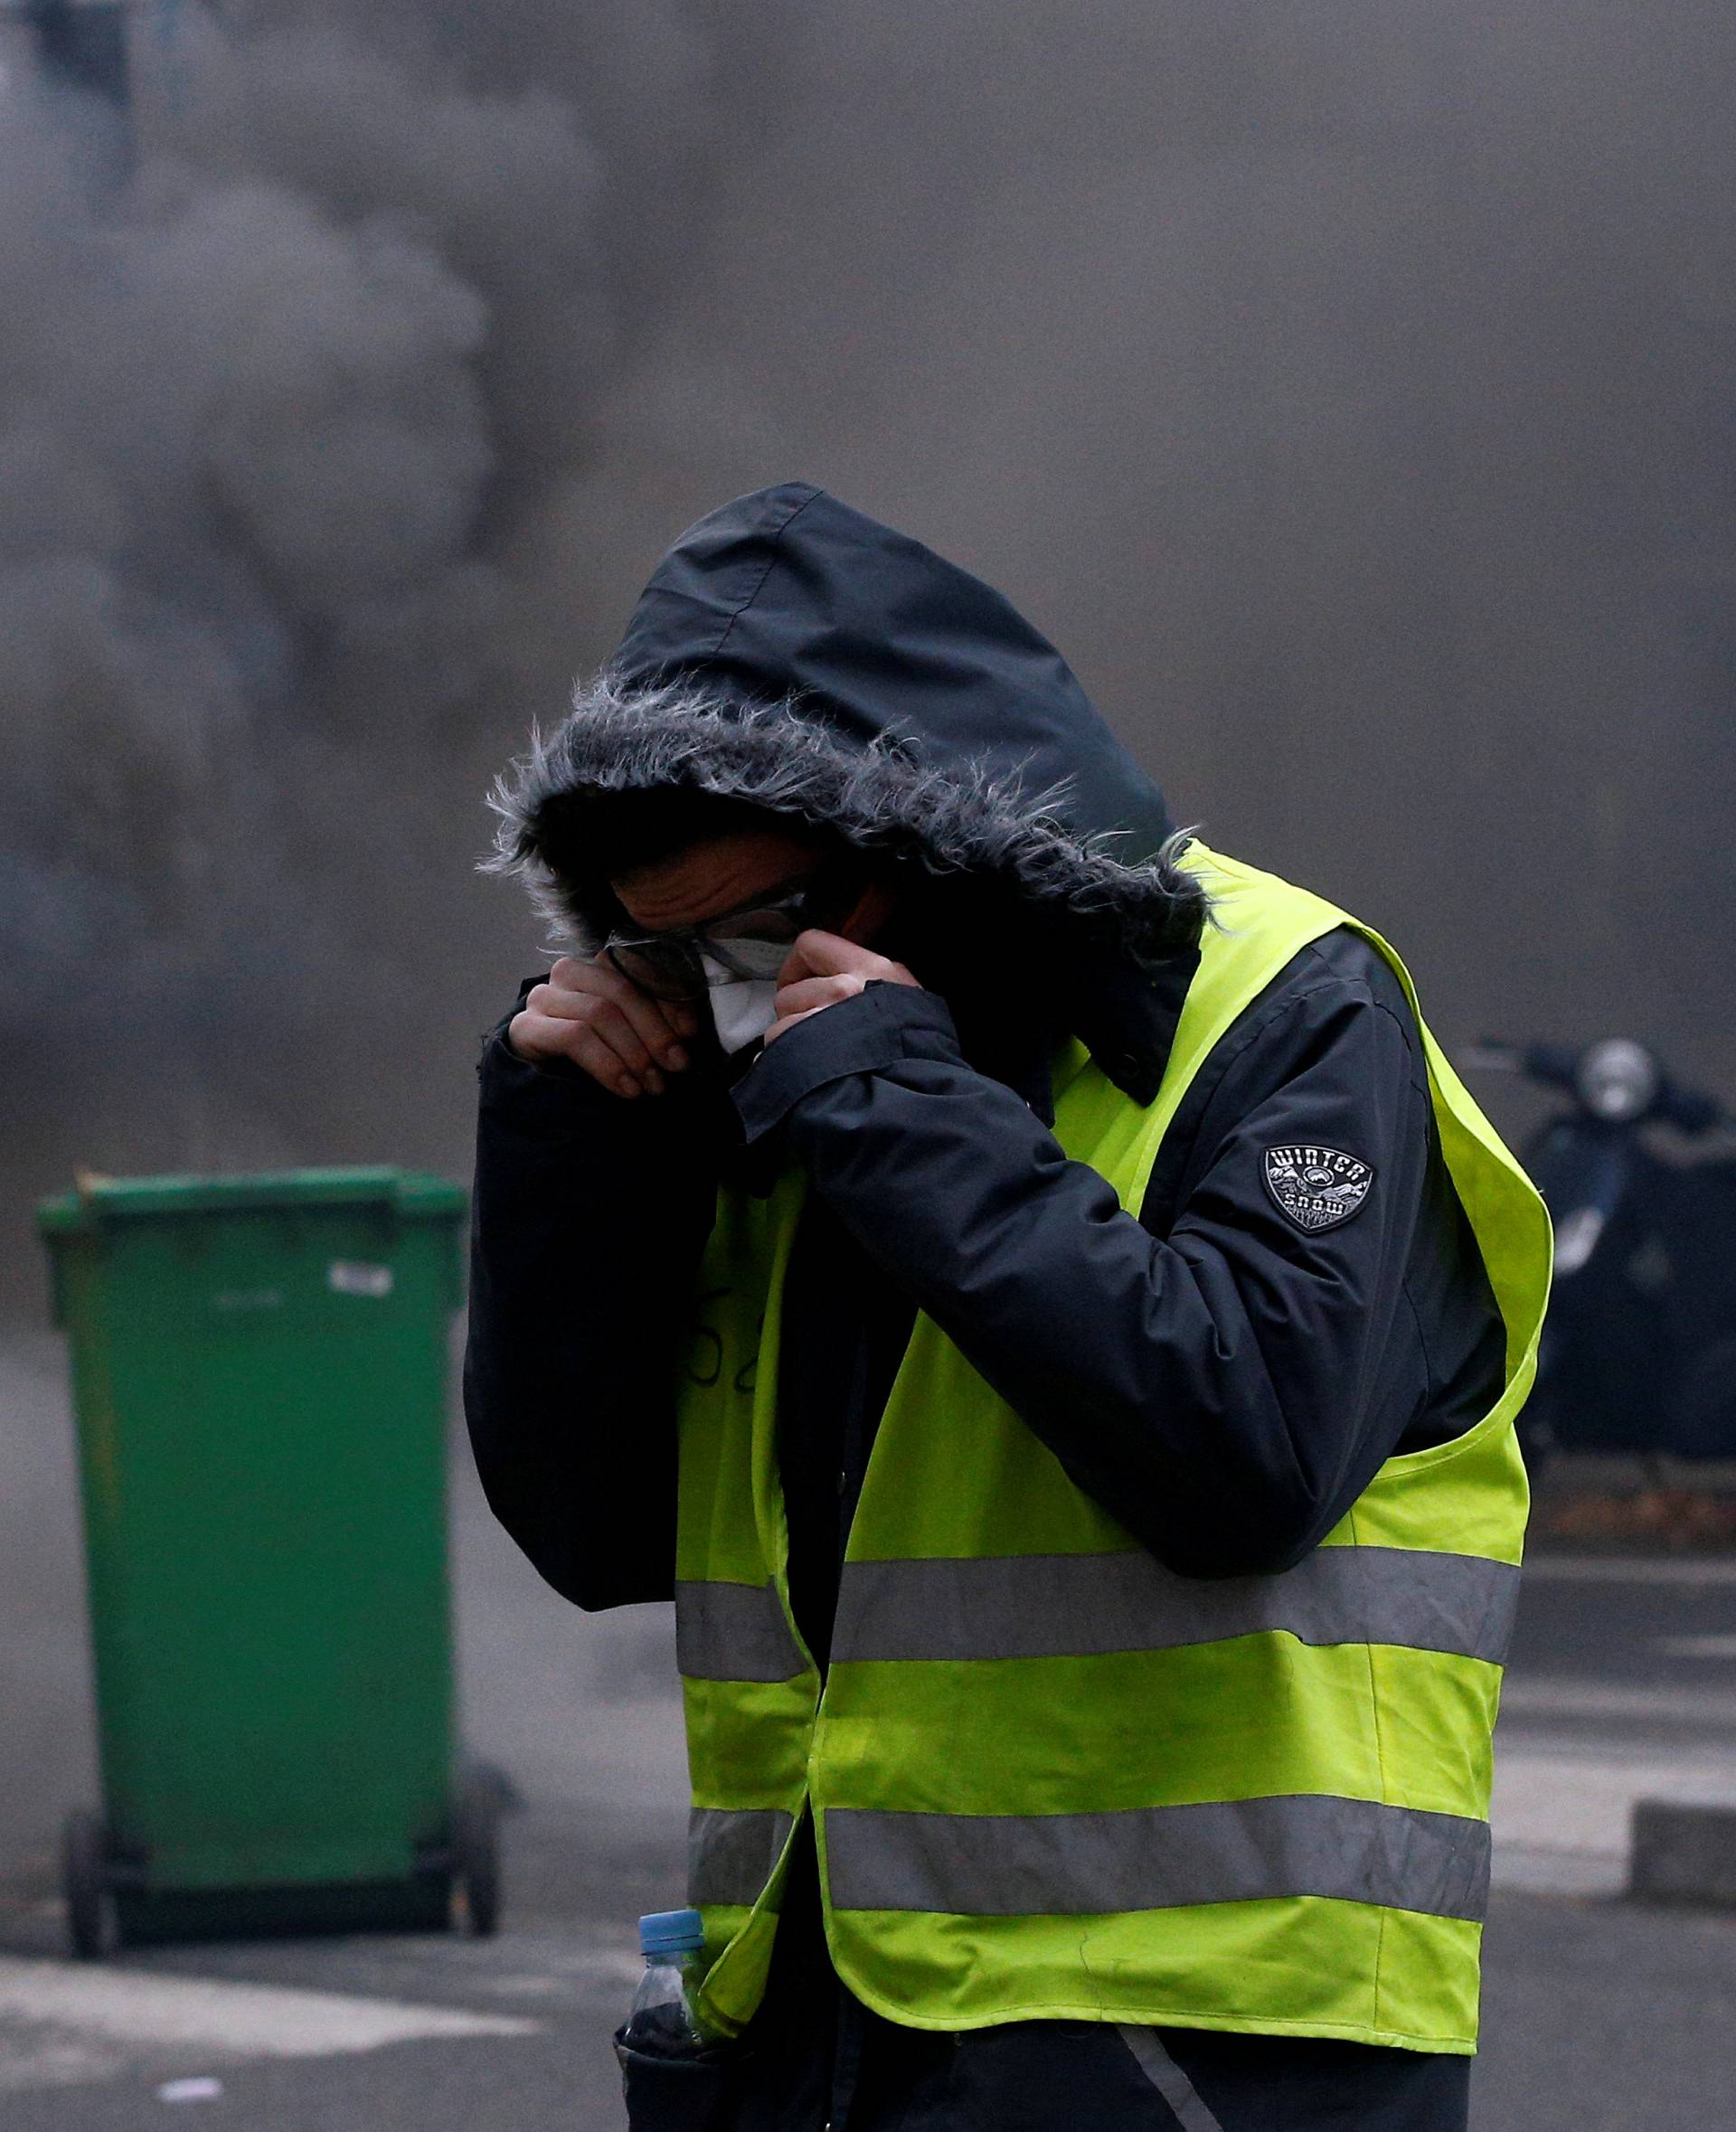 A protester wearing a yellow vest stands next to burning trash bins in a street during a national day of protest by the "yellow vests" movement in Paris